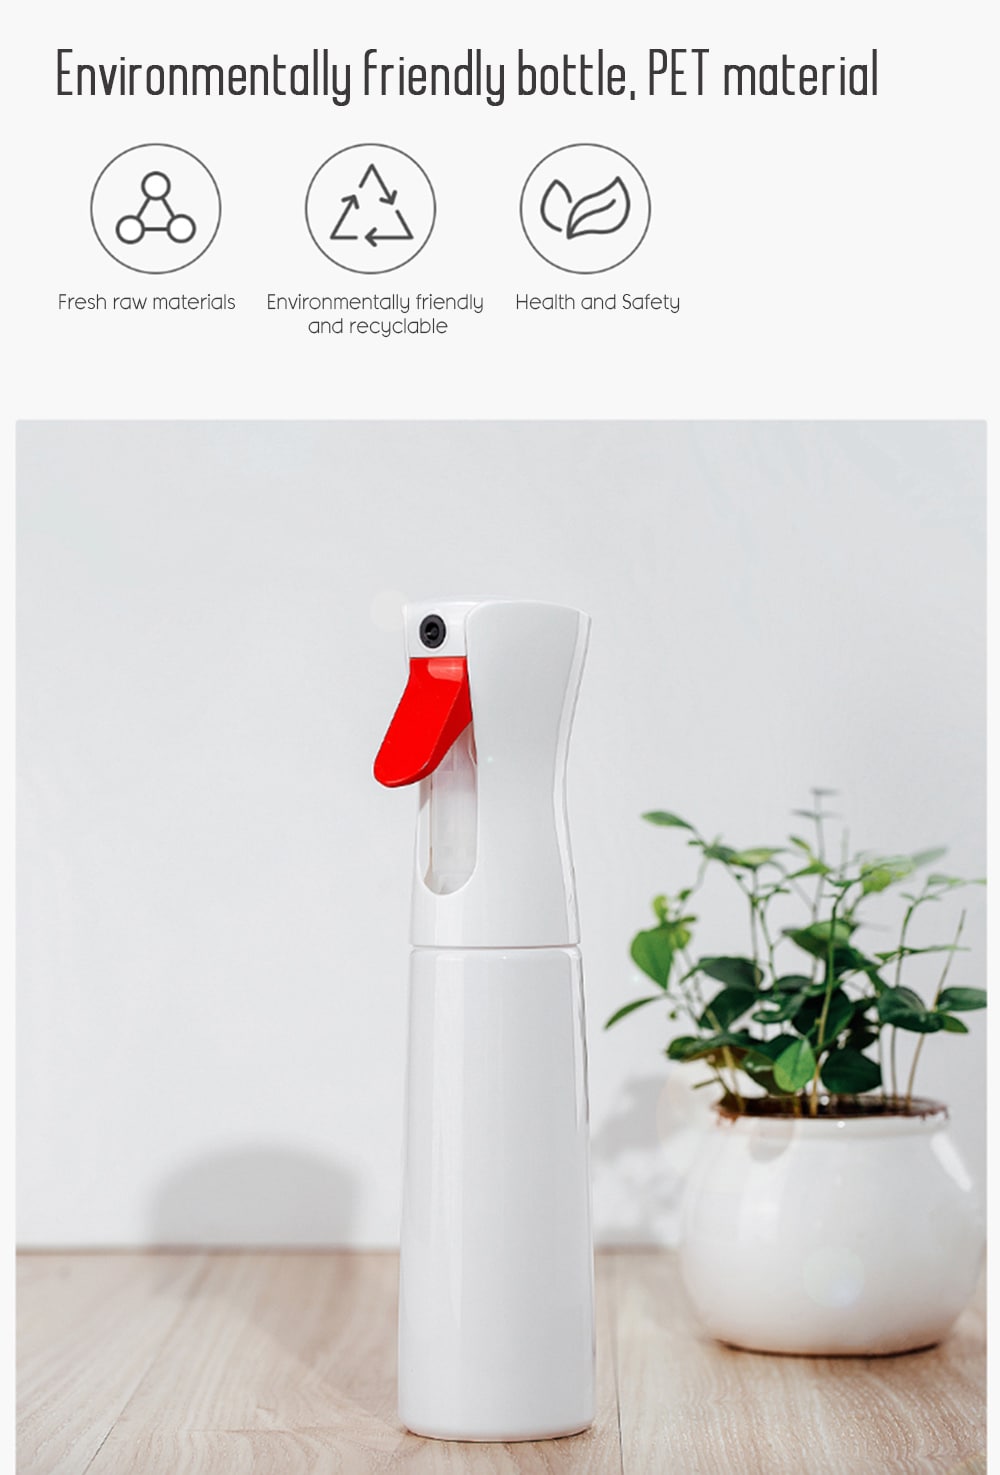 YG - 01 Time Delay Spray Bottle from Xiaomi Youpin- Milk White